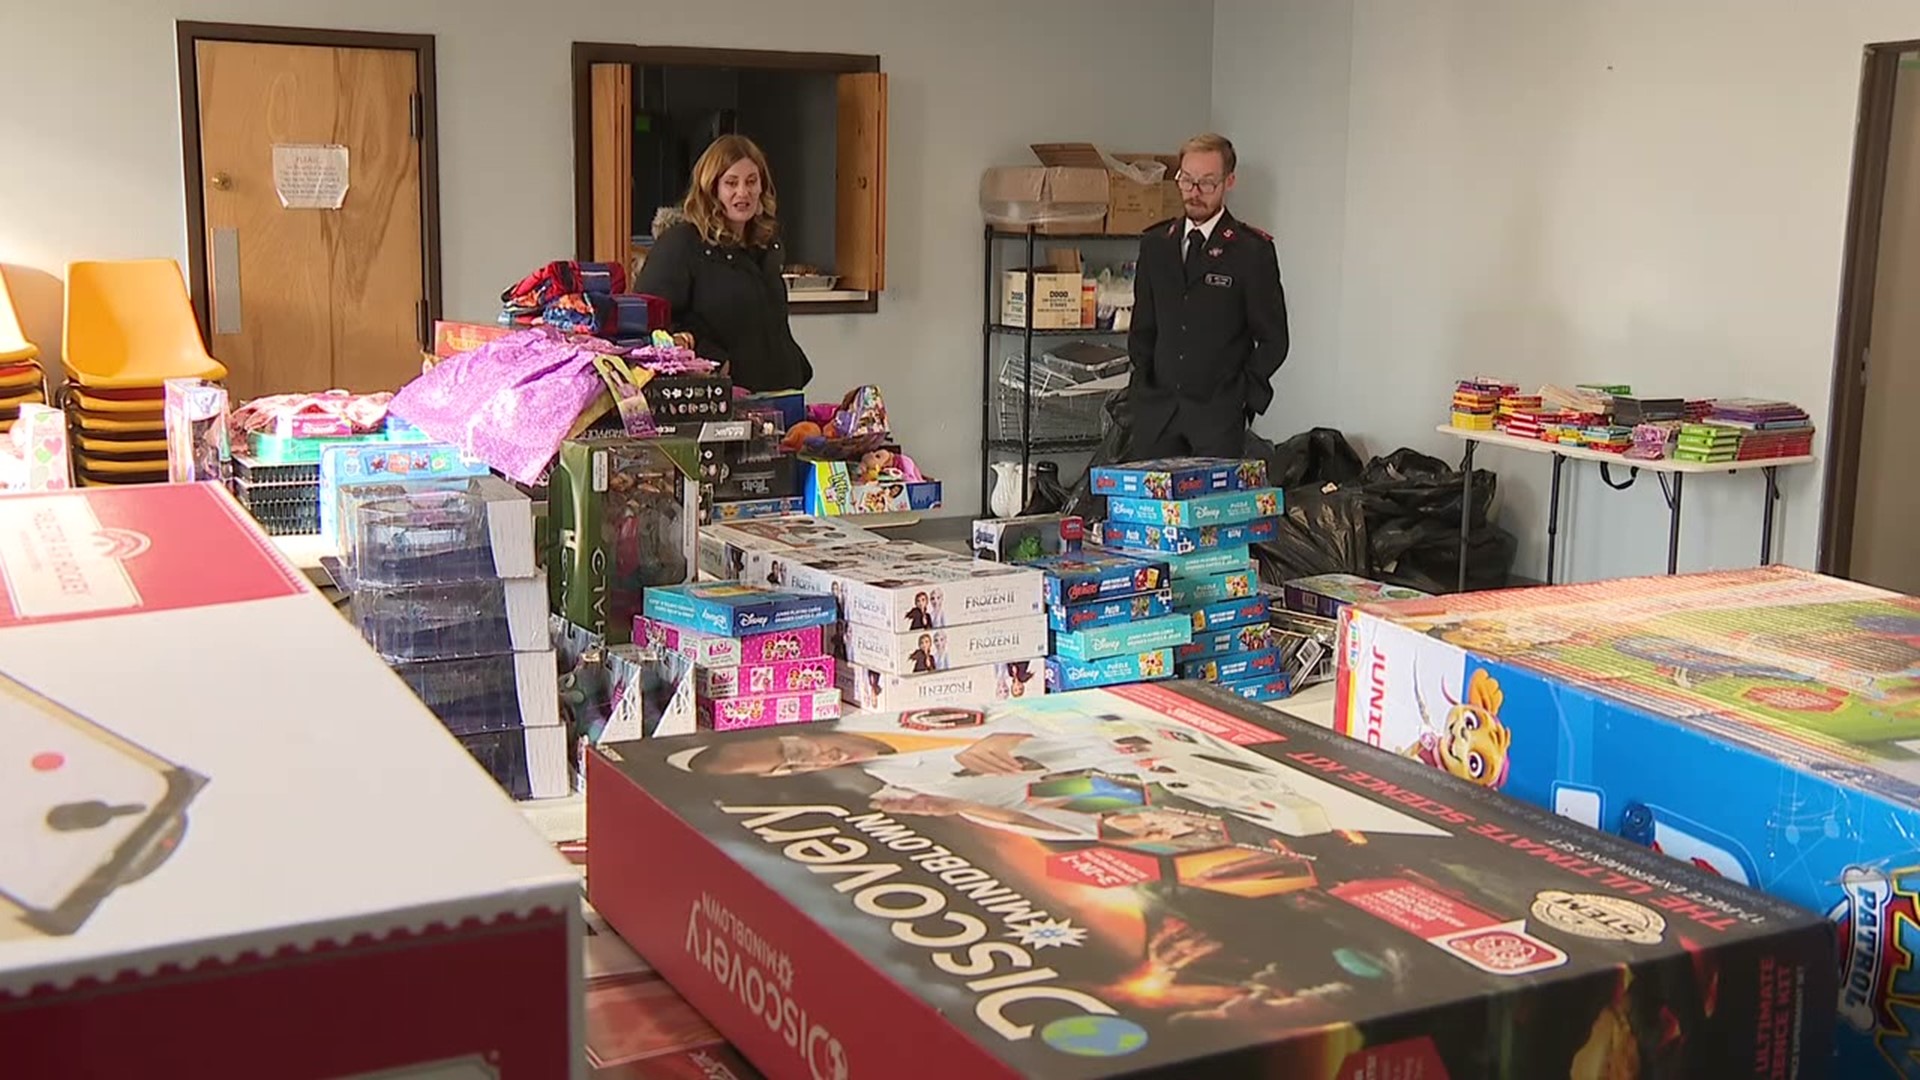 The group typically buys toys for around 300 children, but because of this surprise donation, they can now able to help even more families.